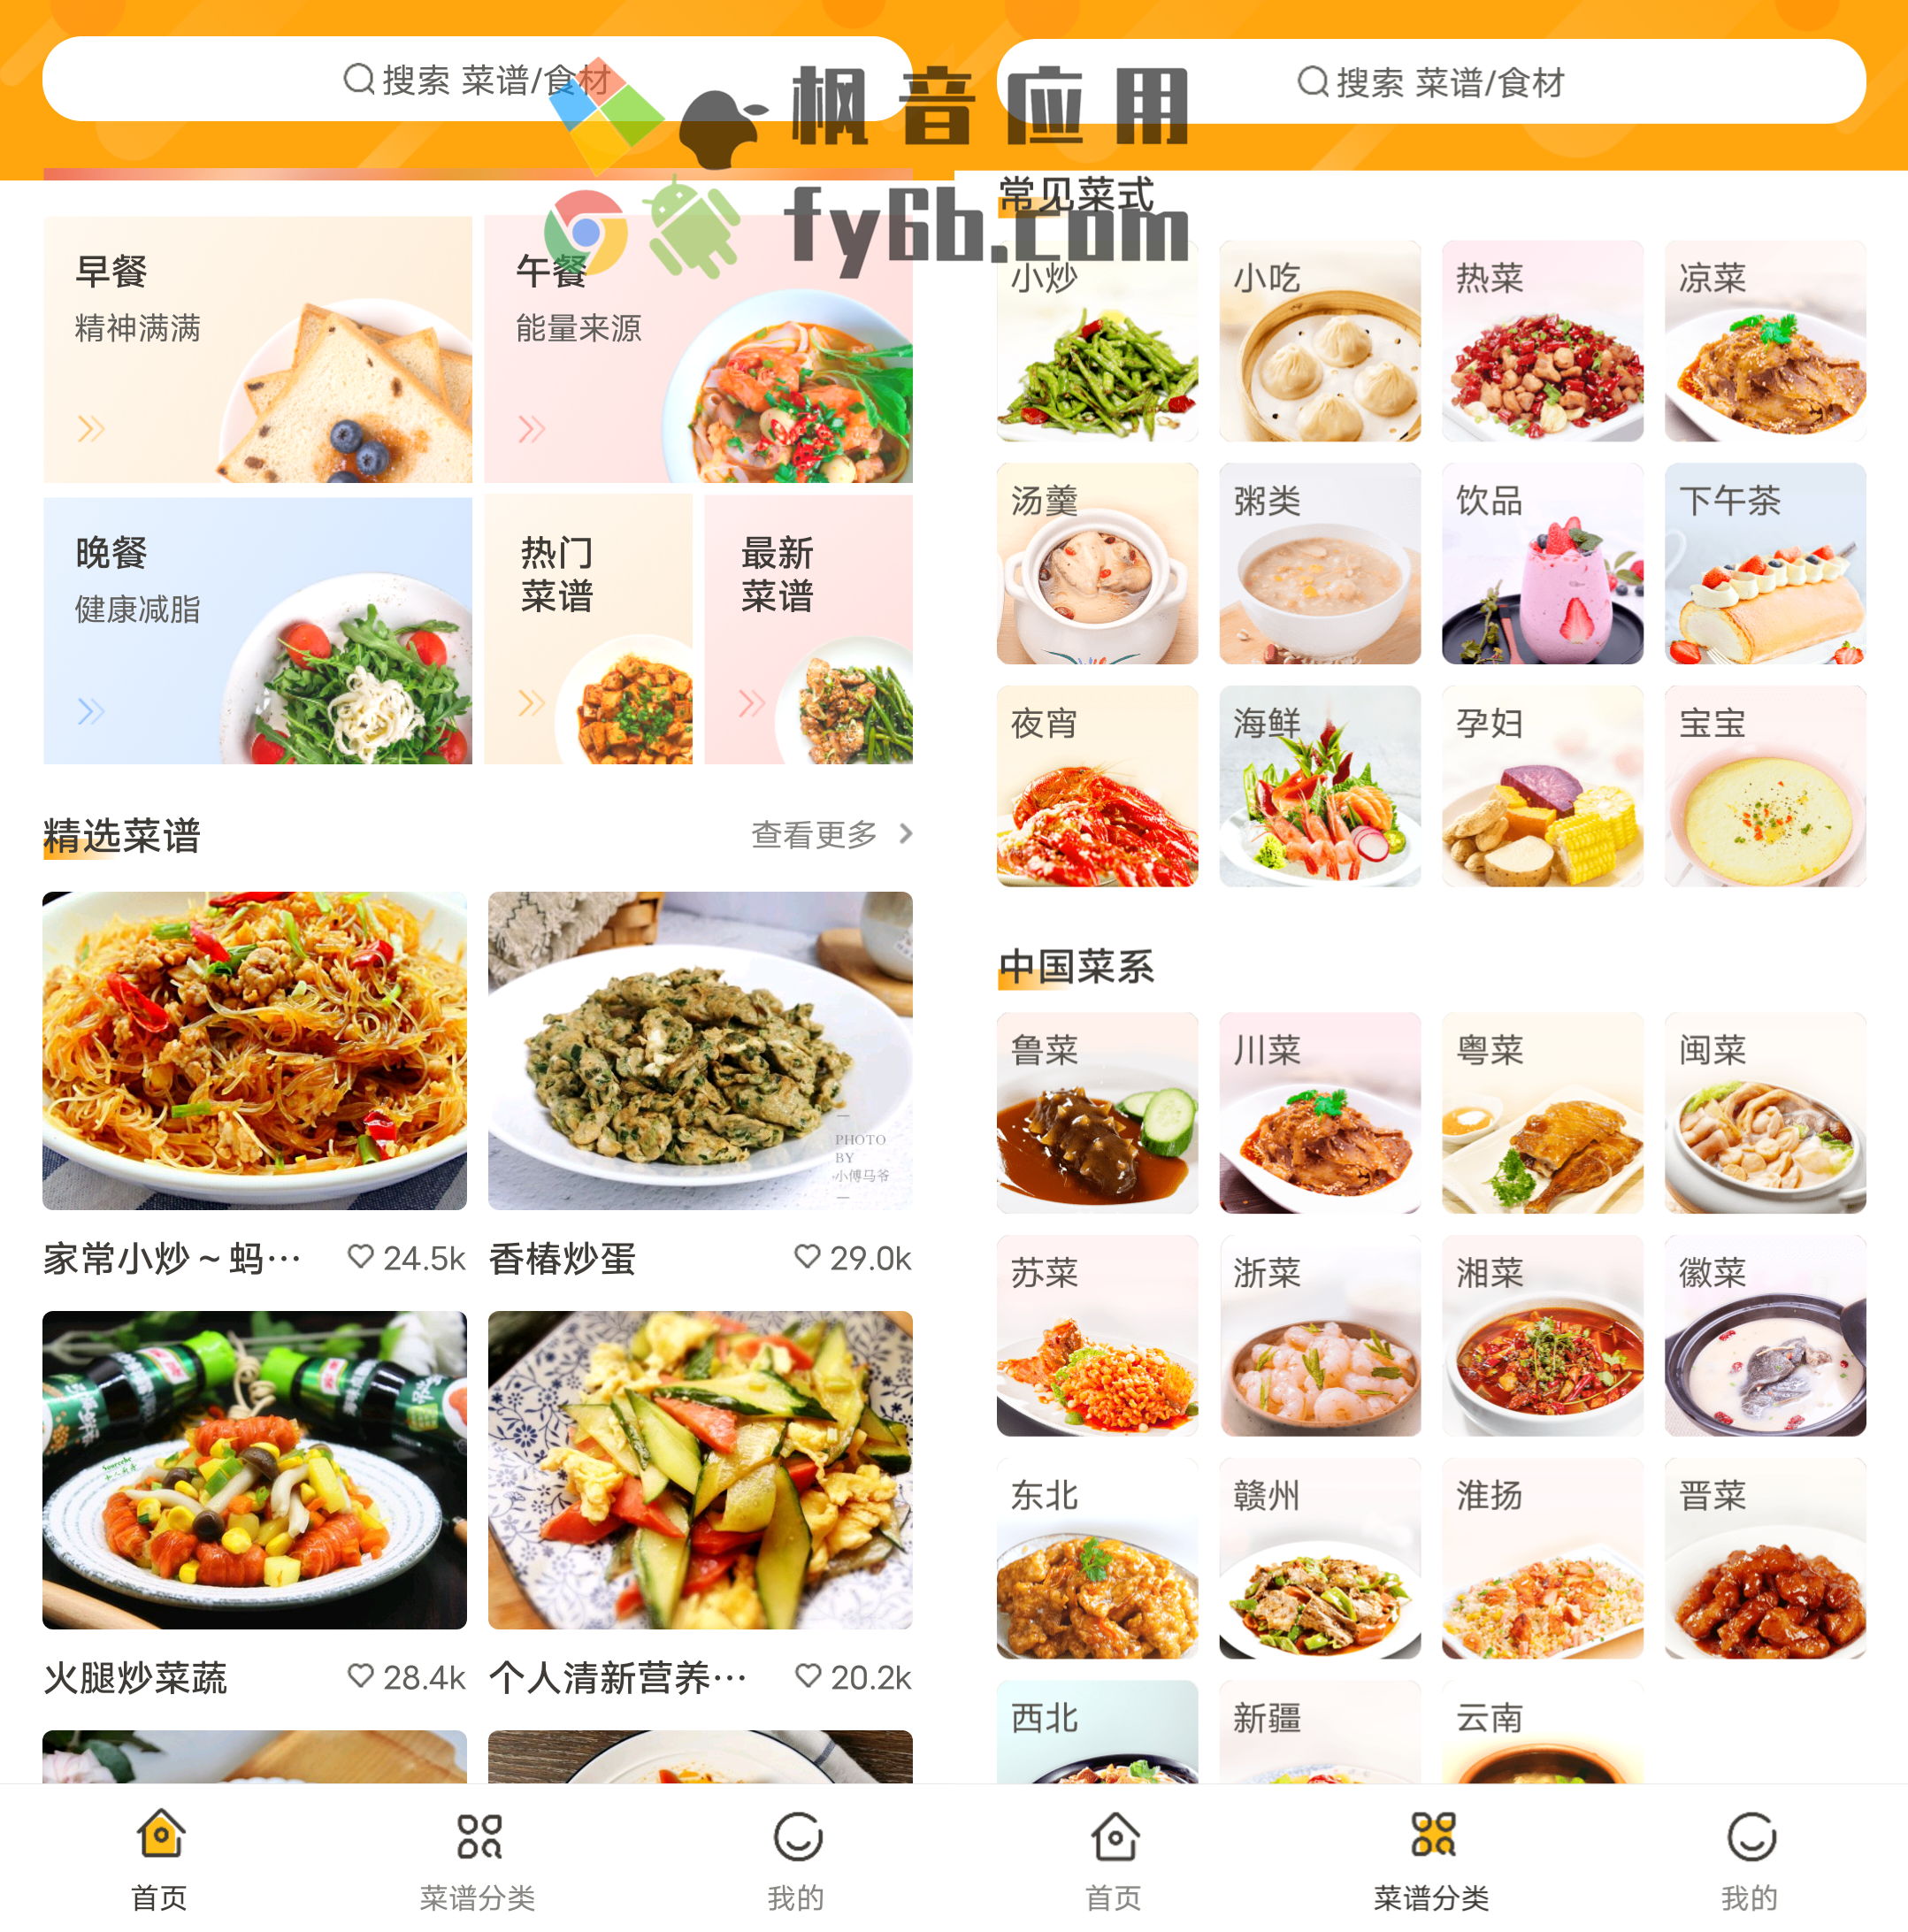 Android 家常菜做法_3.2.0